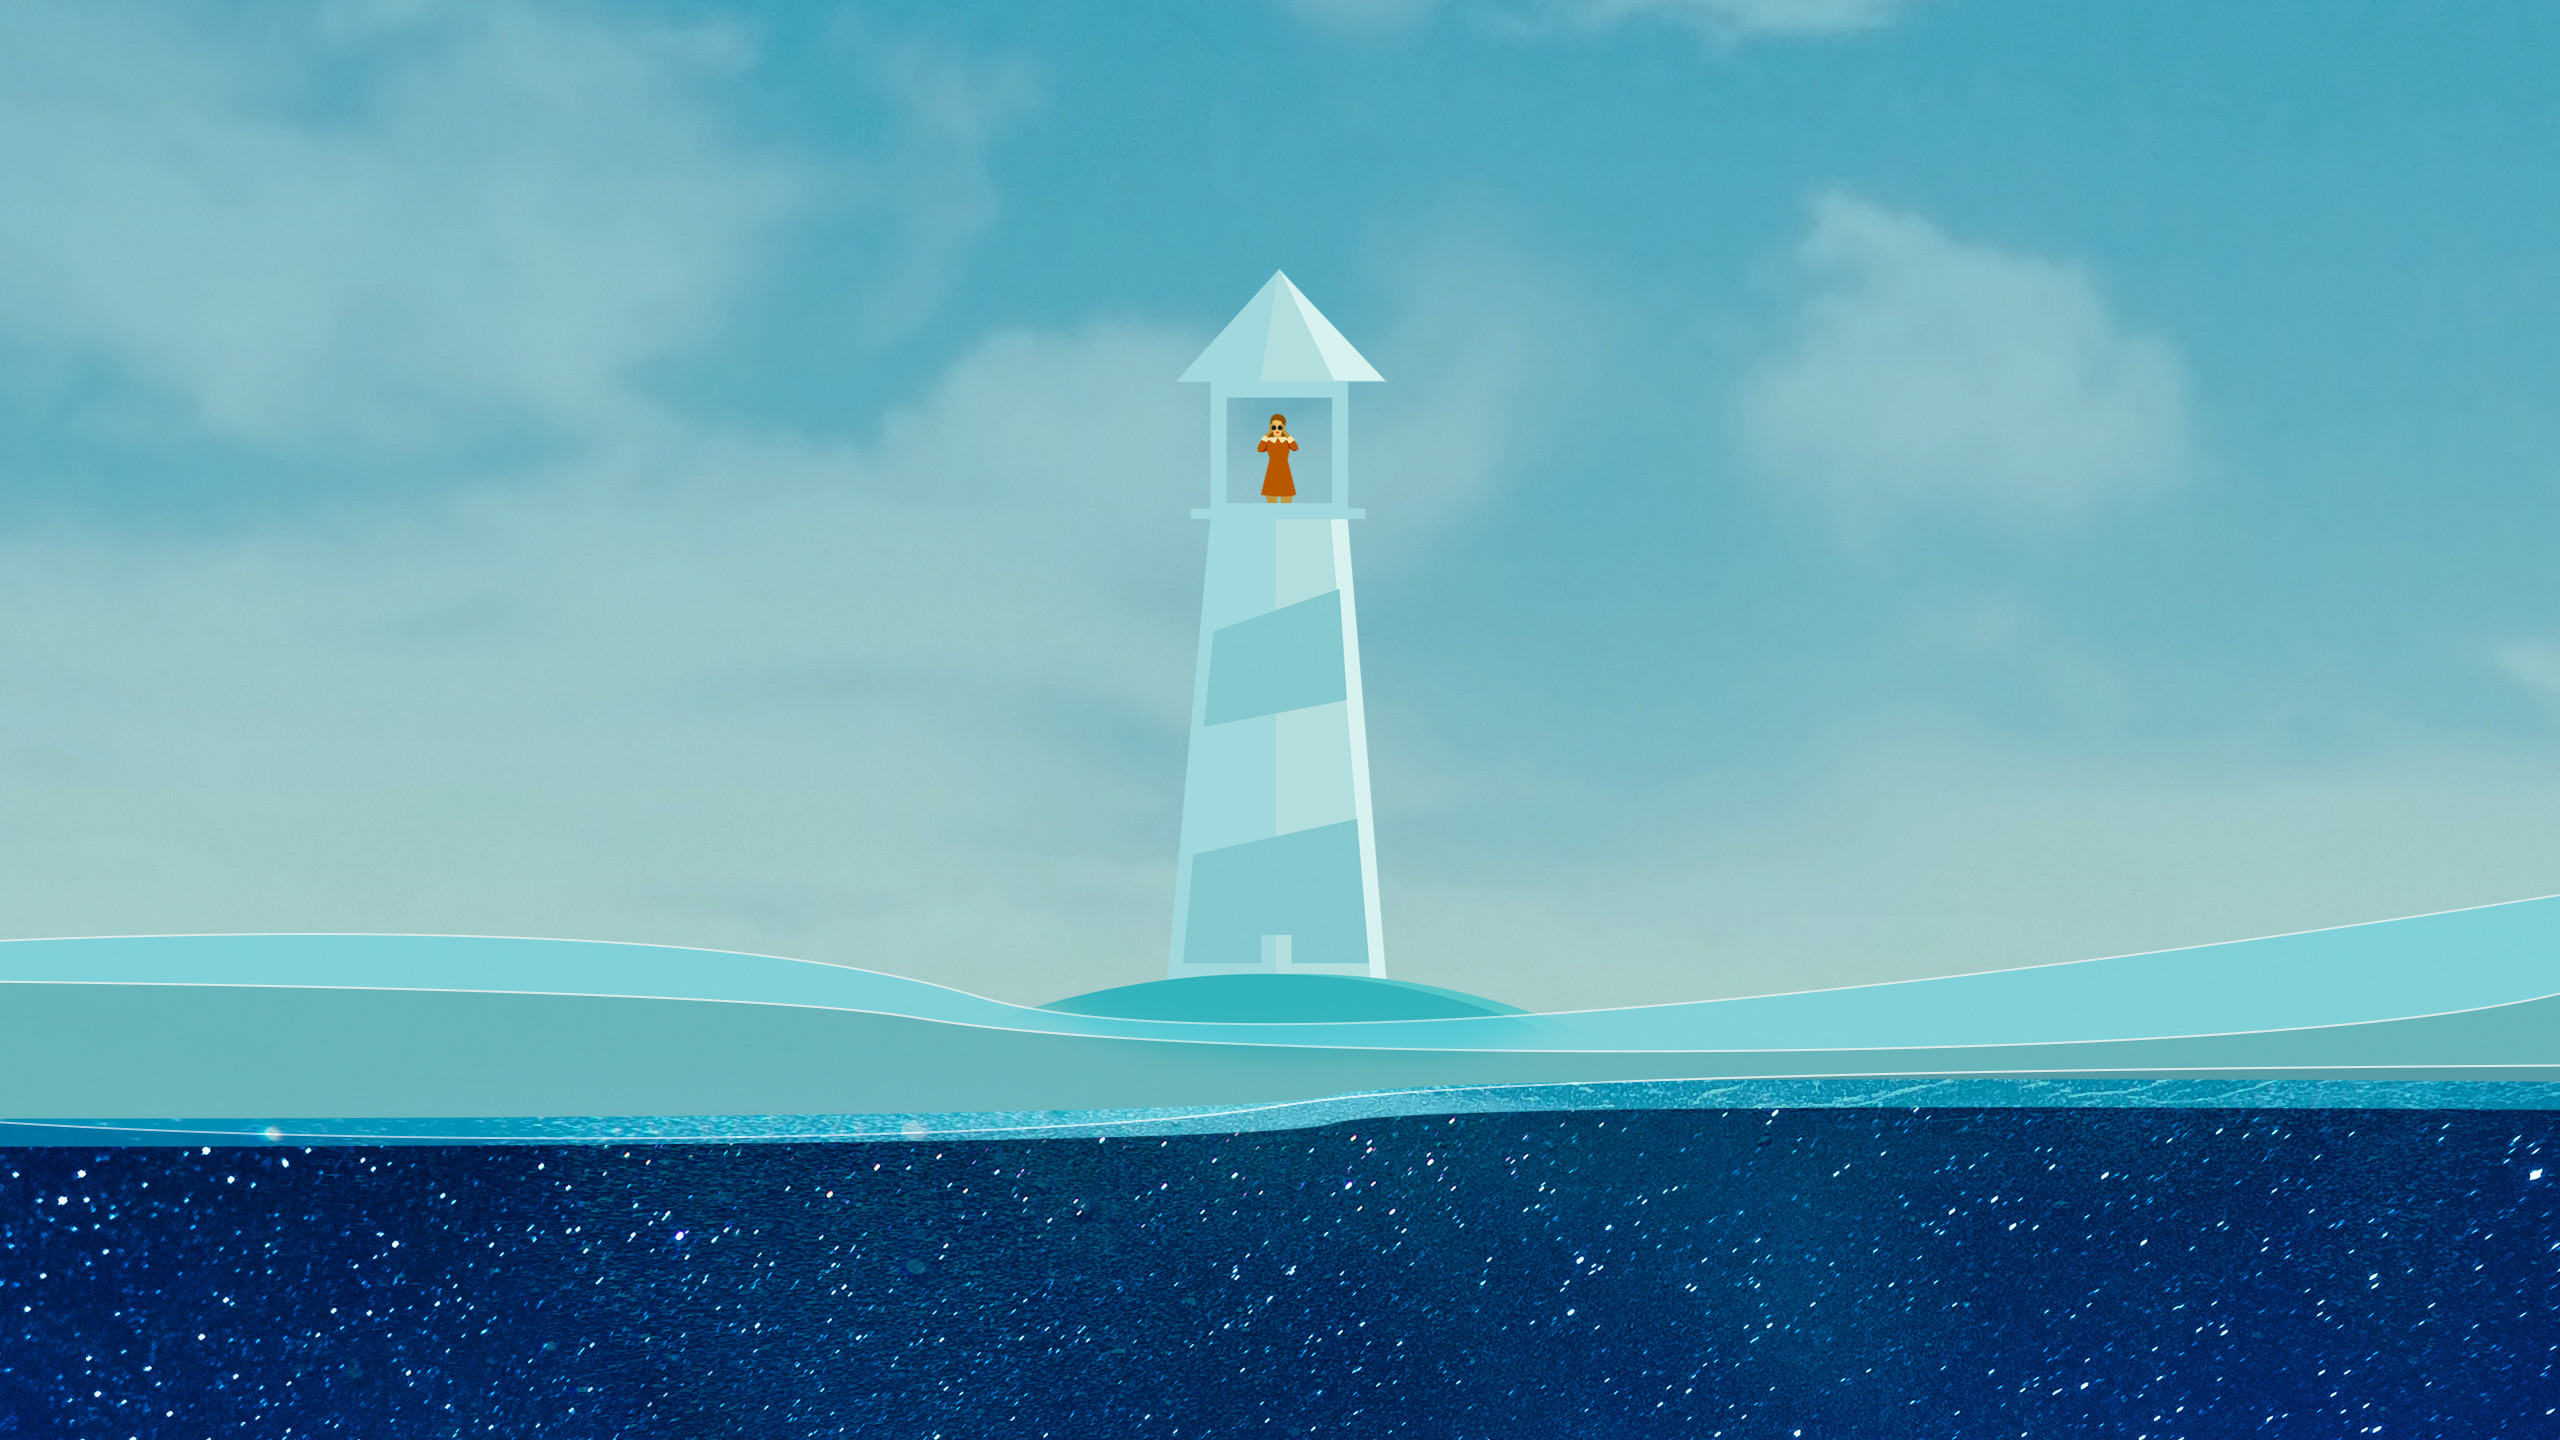 wes anderson wallpaper,tower,lighthouse,beacon,sky,illustration